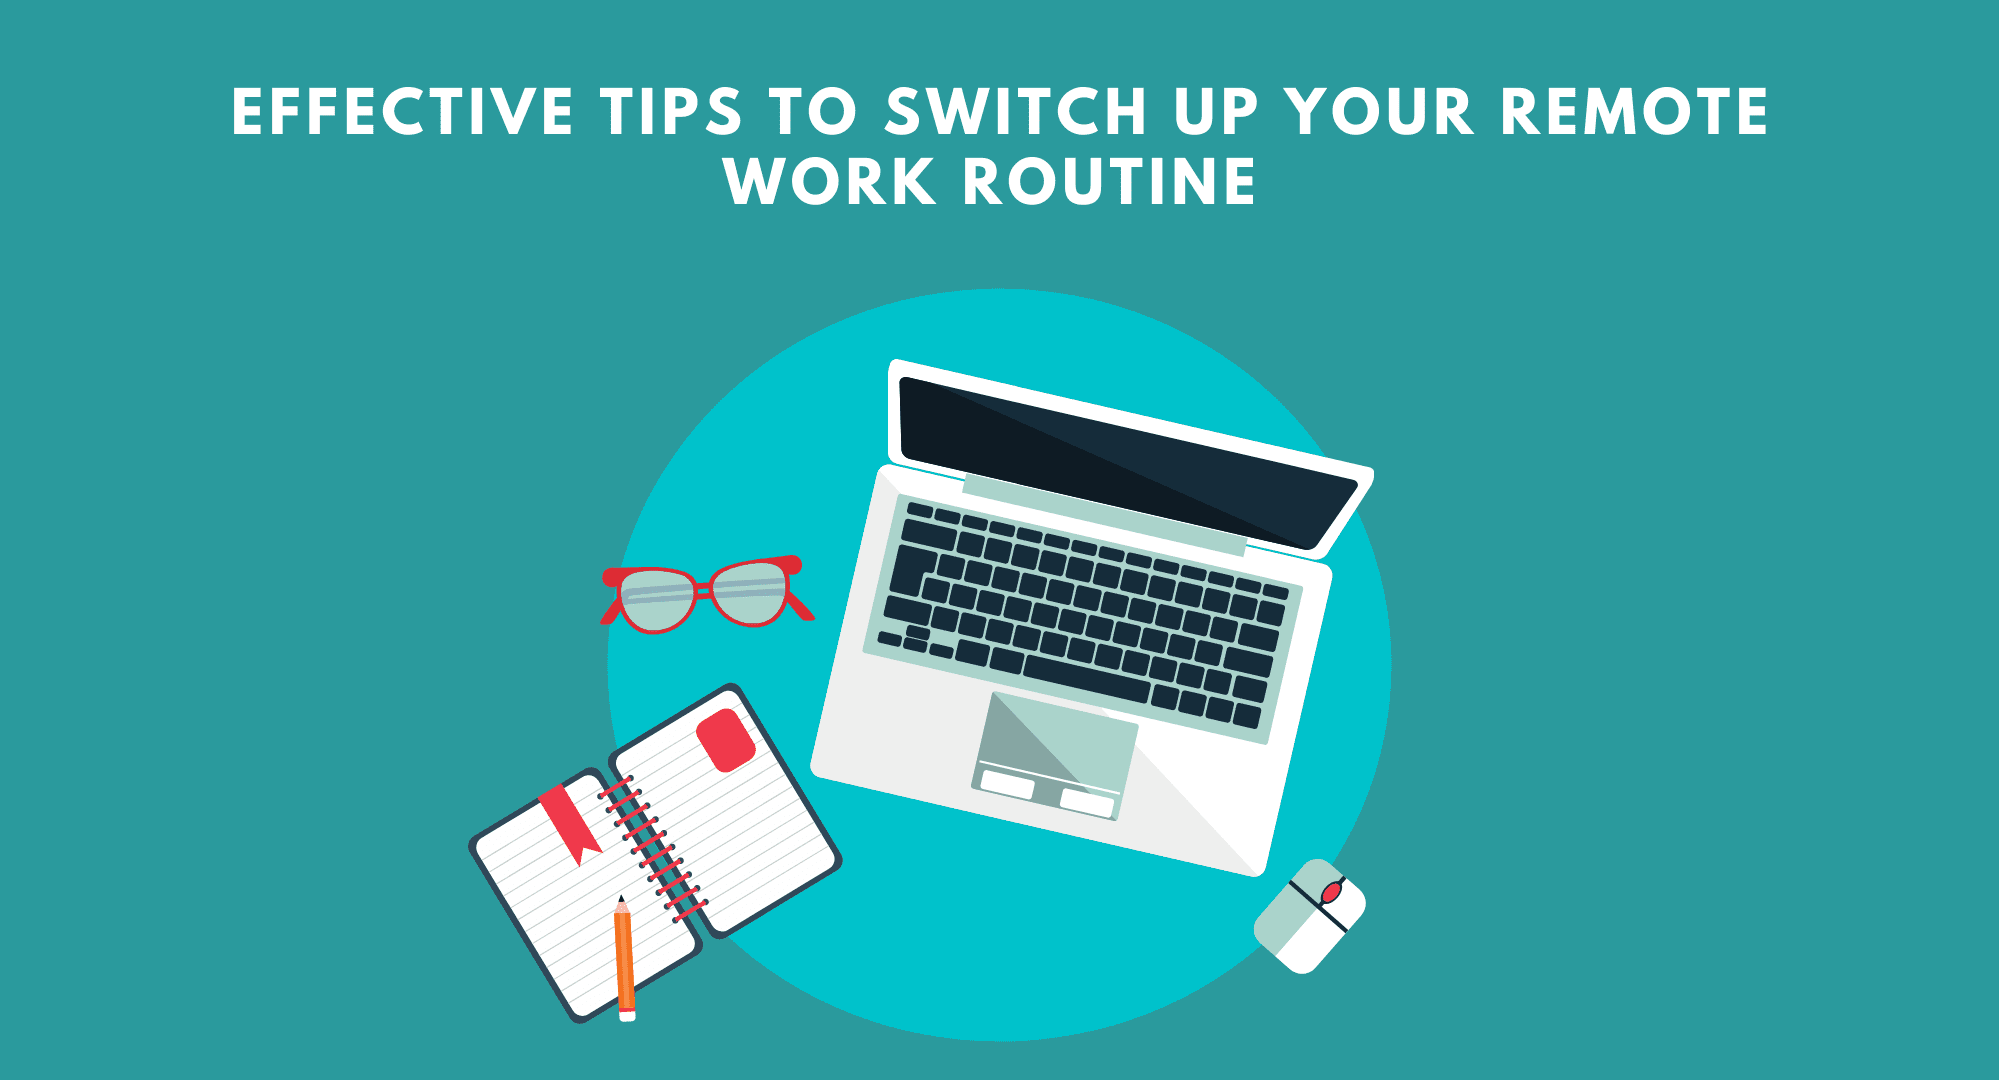 Effective Tips To Switch Up Your Remote Work Routine. Effective Tips To Switch Up Your Remote Work Routine. Tips for Working From Home.Habits for Crafting the Perfect Remote Work Day.